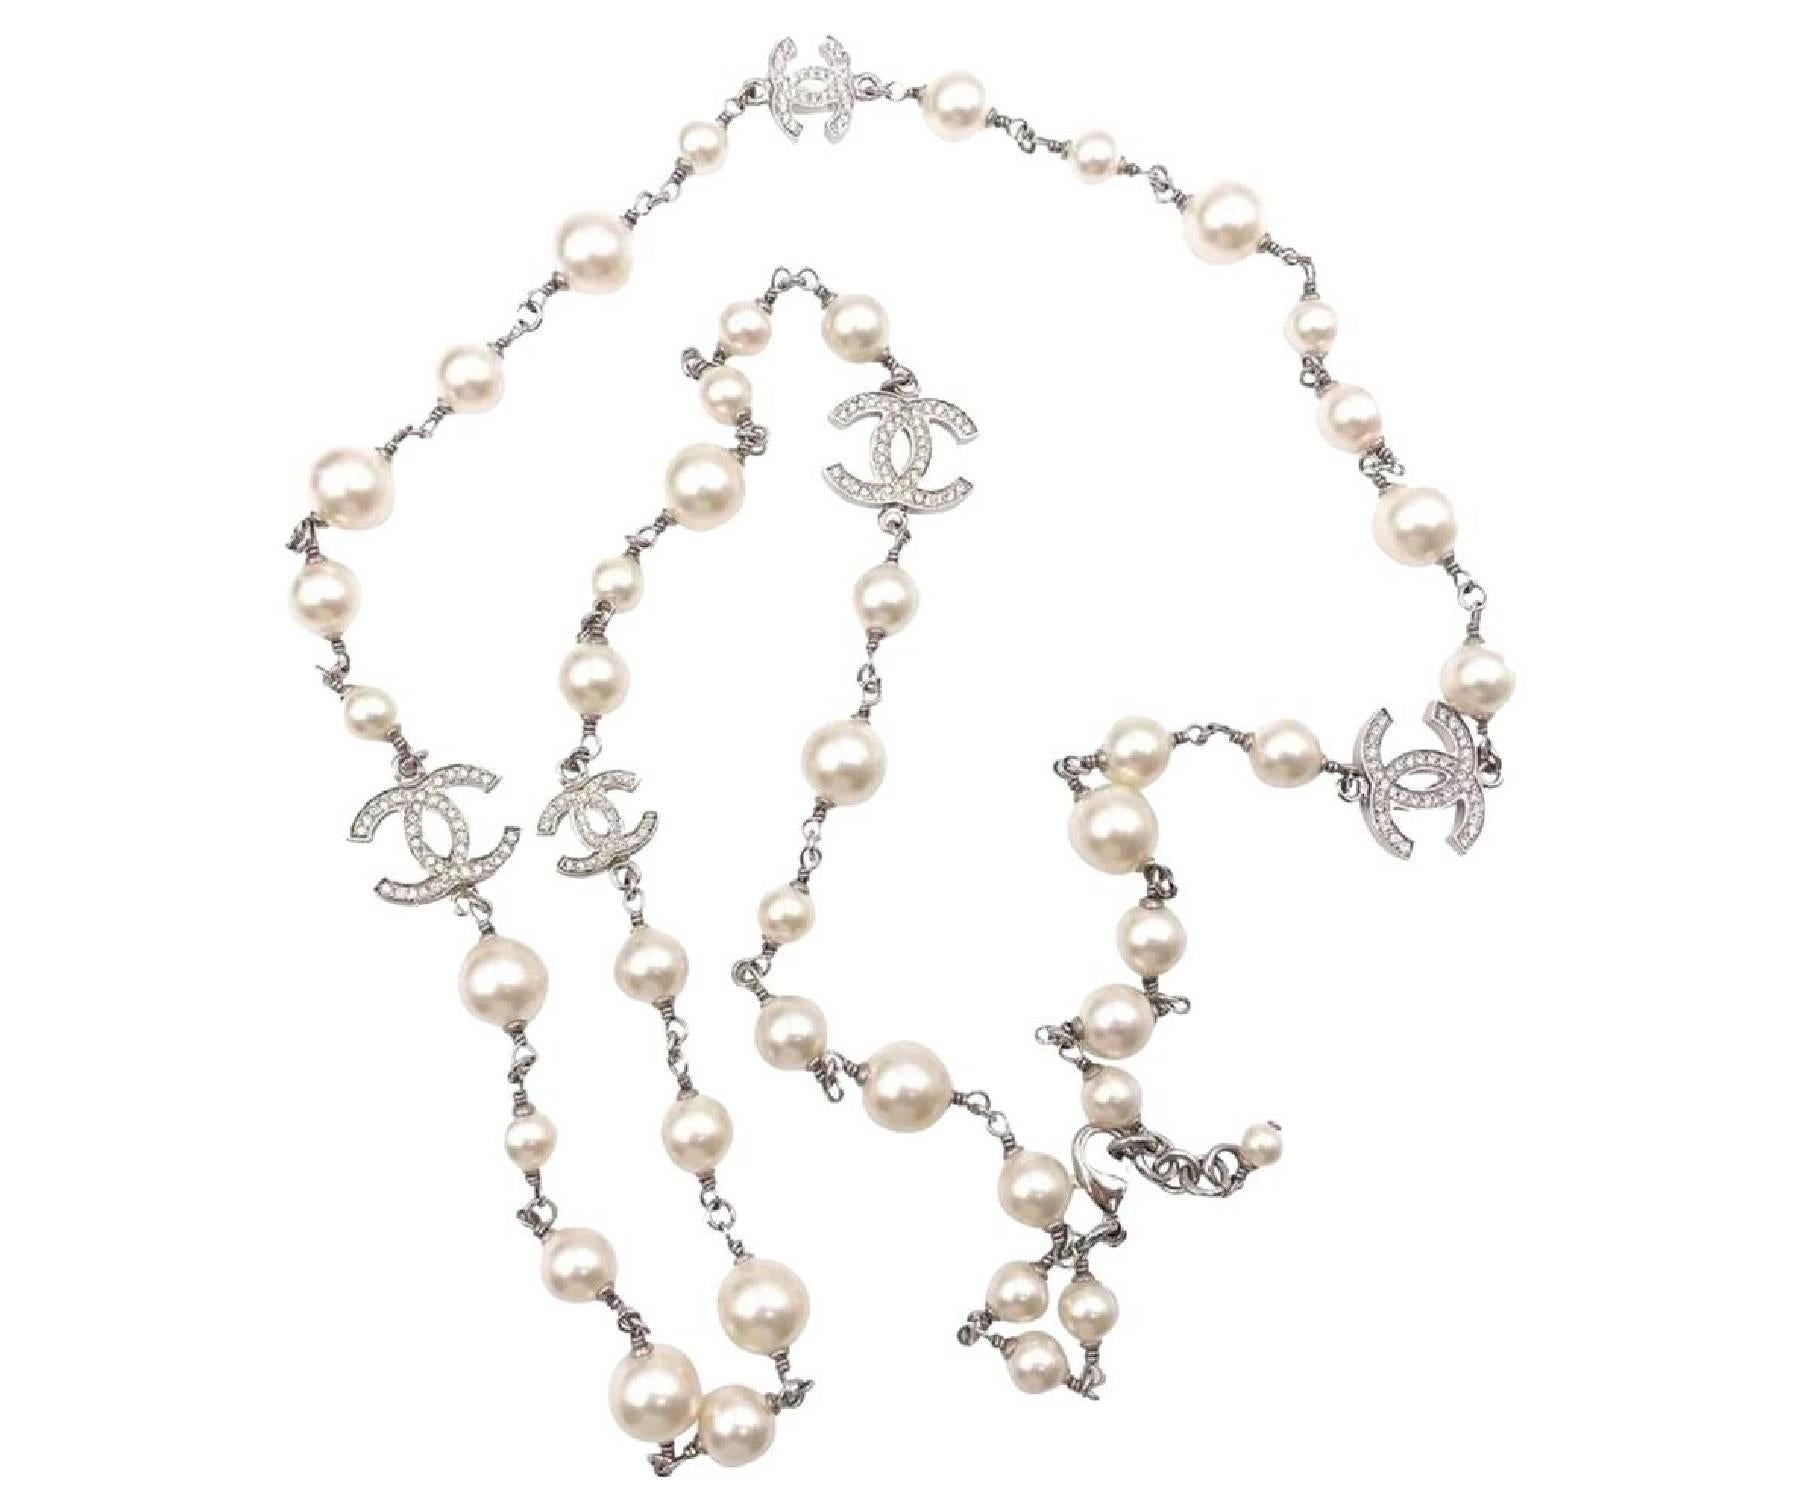 Chanel Classic 5 Silver CC Crystal Faux Pearl Long Necklace

* Marked 16
* Made in France
* Comes with the original dustbag

-It is approximately 42